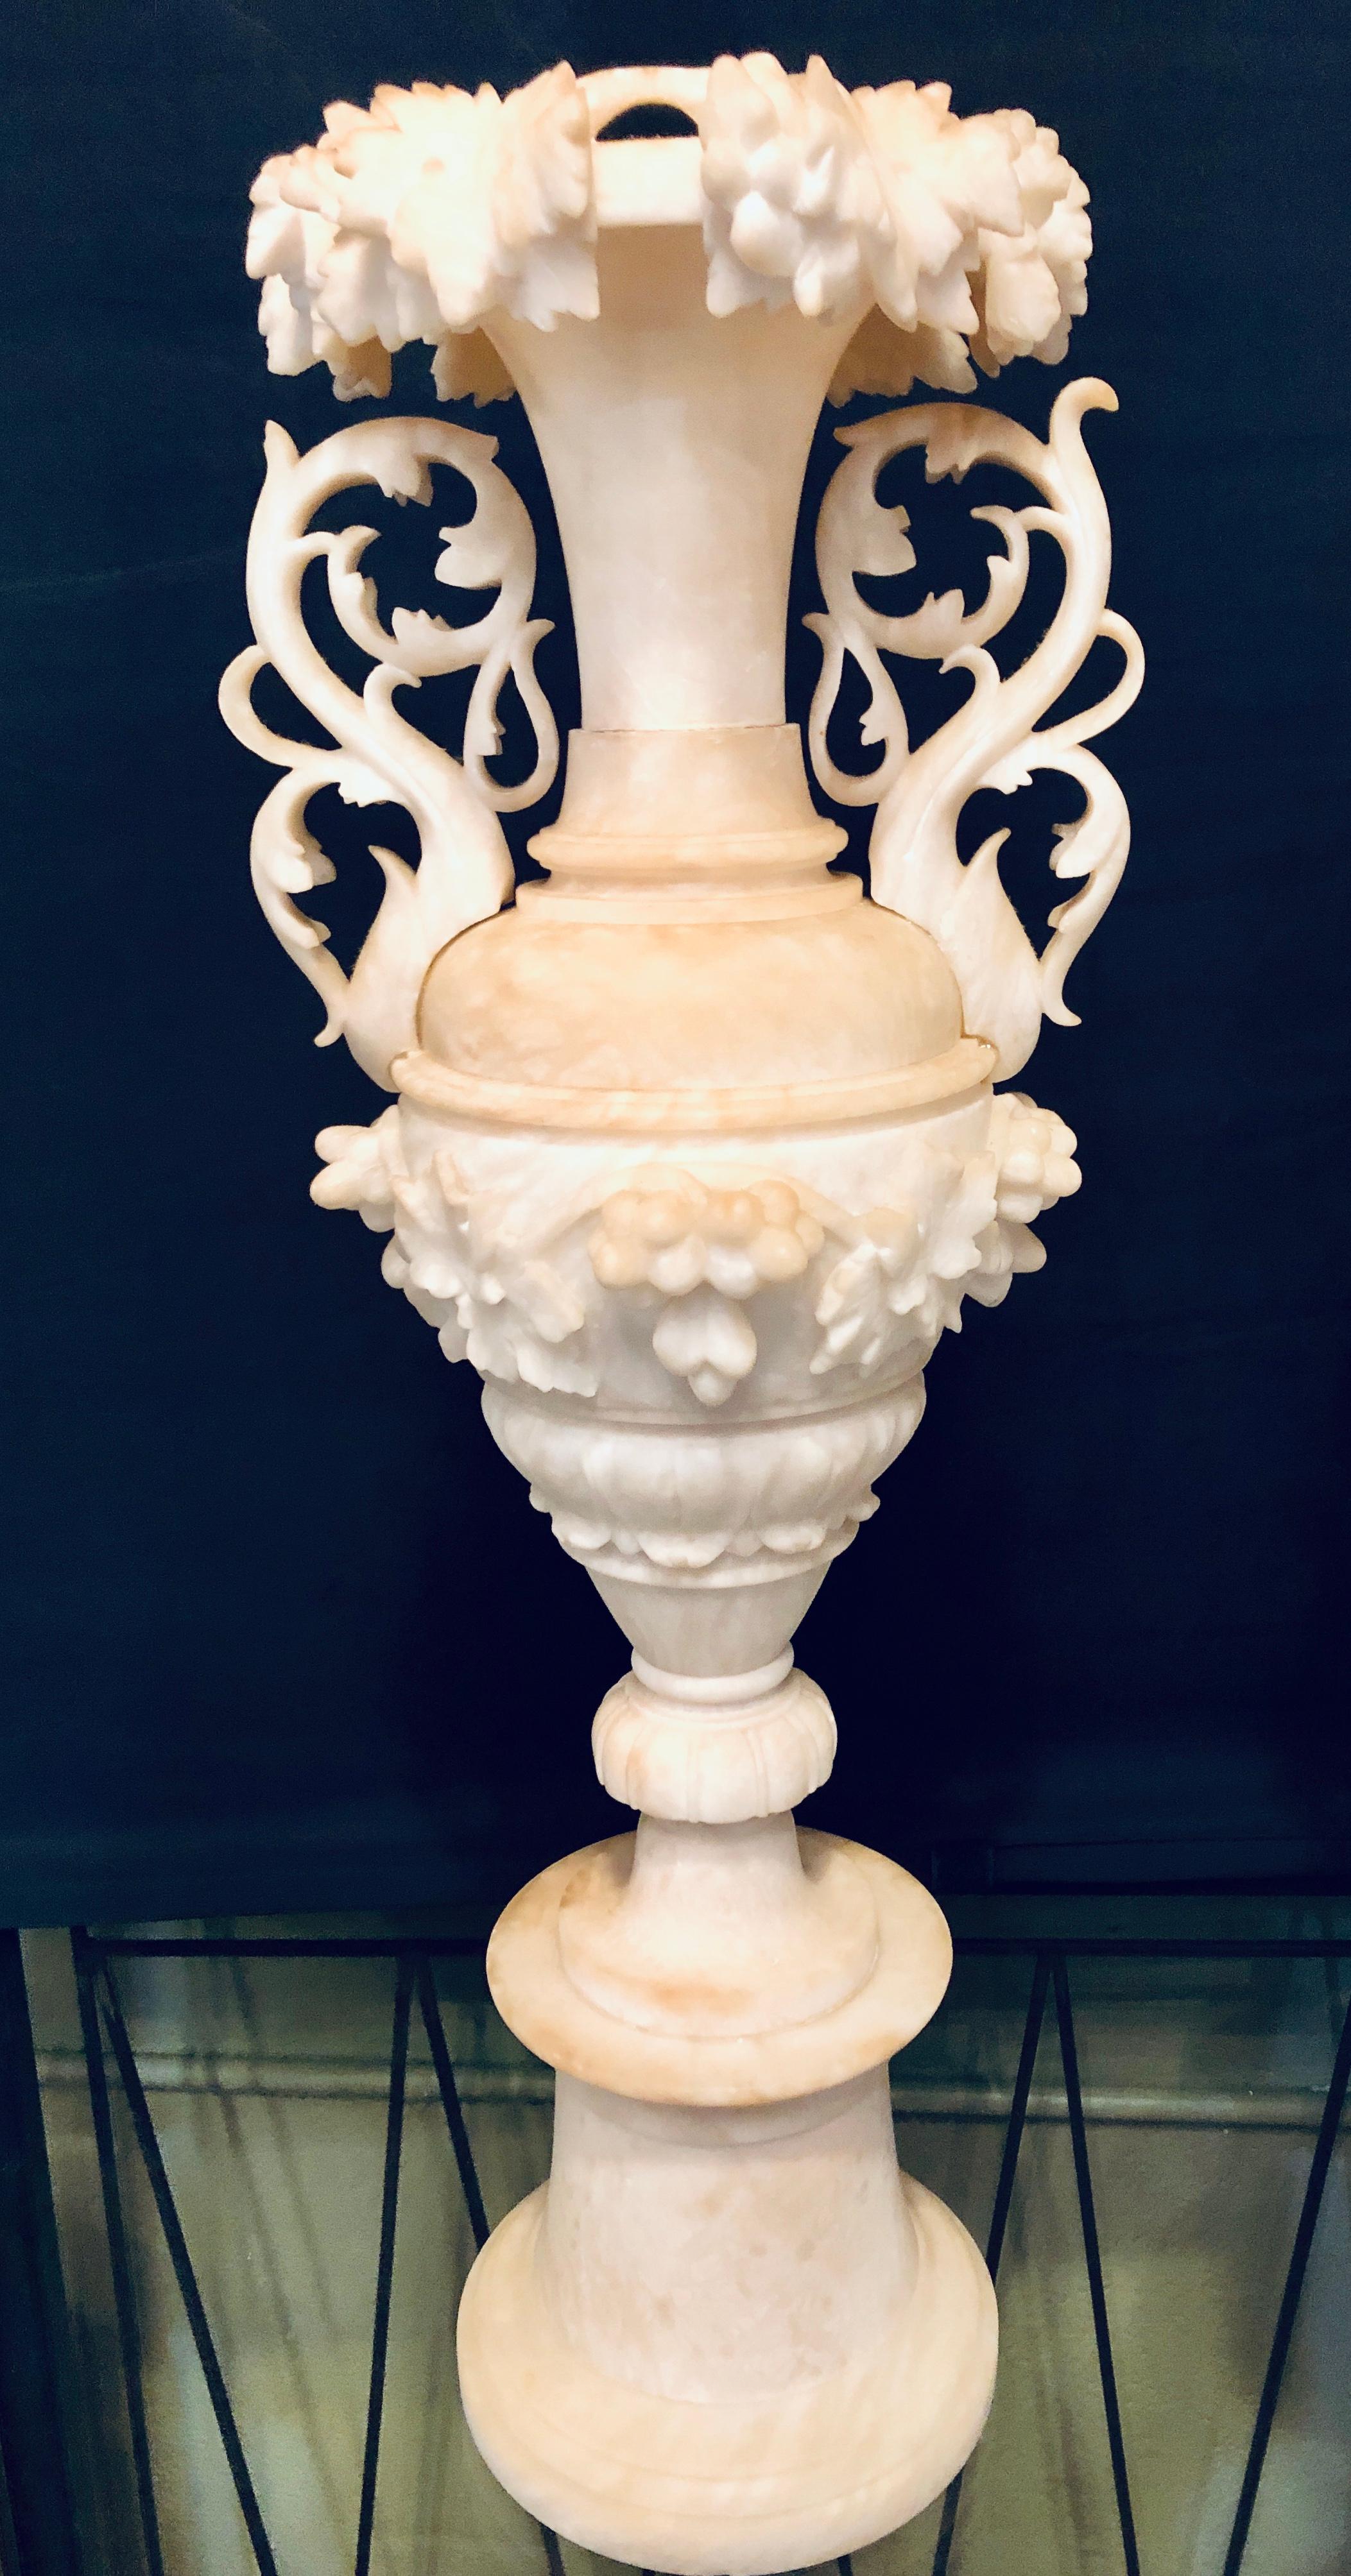 Pair of neoclassical 19th century alabaster three-piece urns or vases. This fine classical designed pair of table urns or vases are simply stunning with their pierced handled and grape on the vine design. Having old repairs as one would expect these